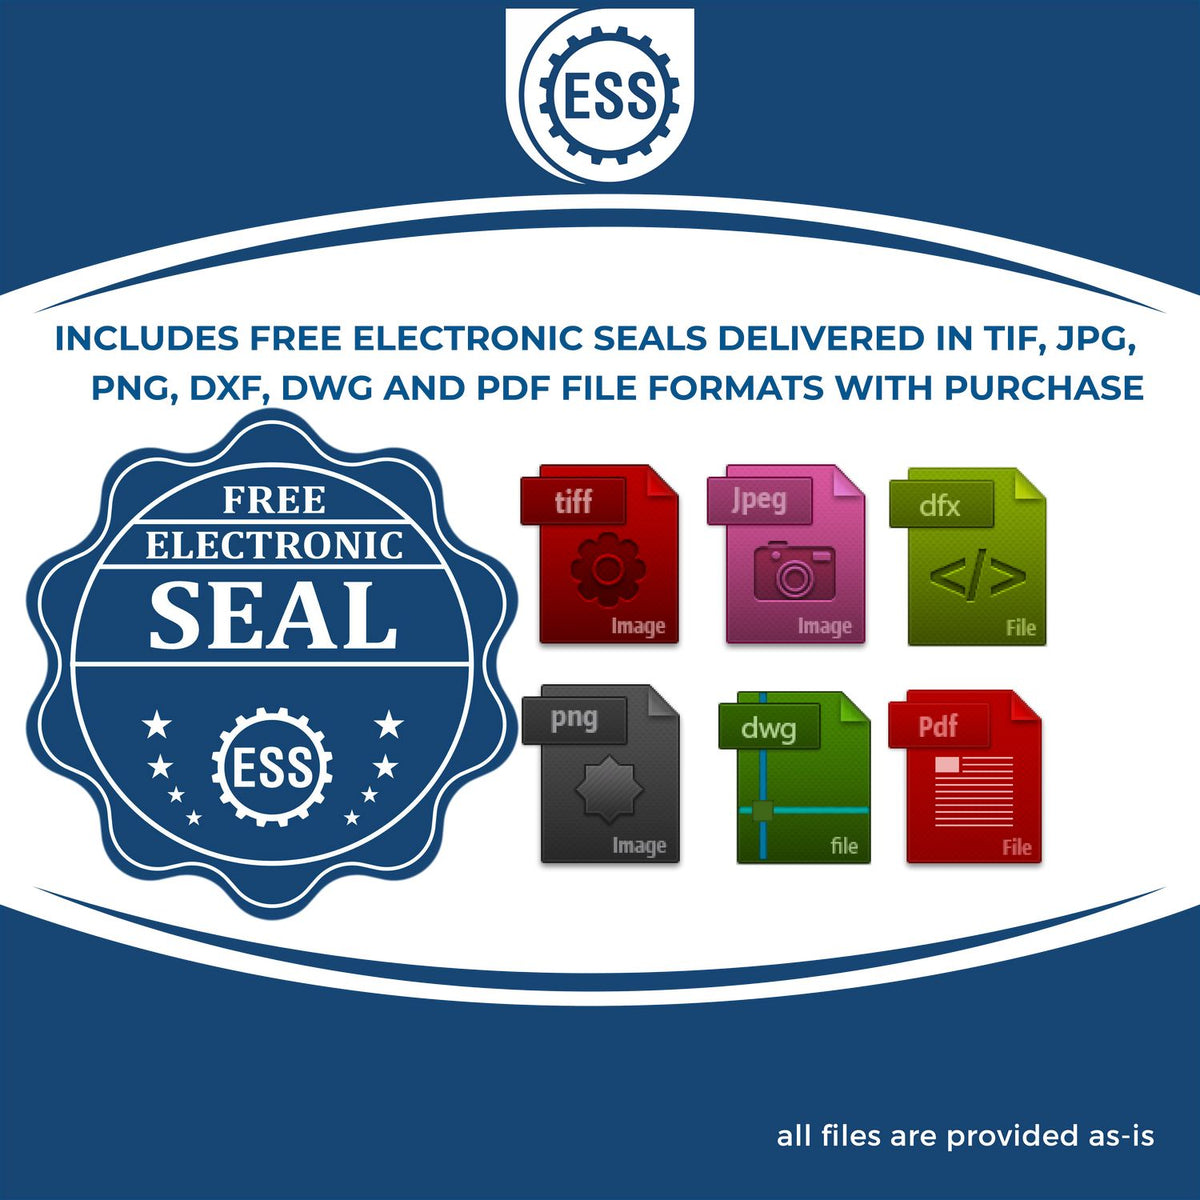 An infographic for the free electronic seal for the Extended Long Reach Minnesota Architect Seal Embosser illustrating the different file type icons such as DXF, DWG, TIF, JPG and PNG.